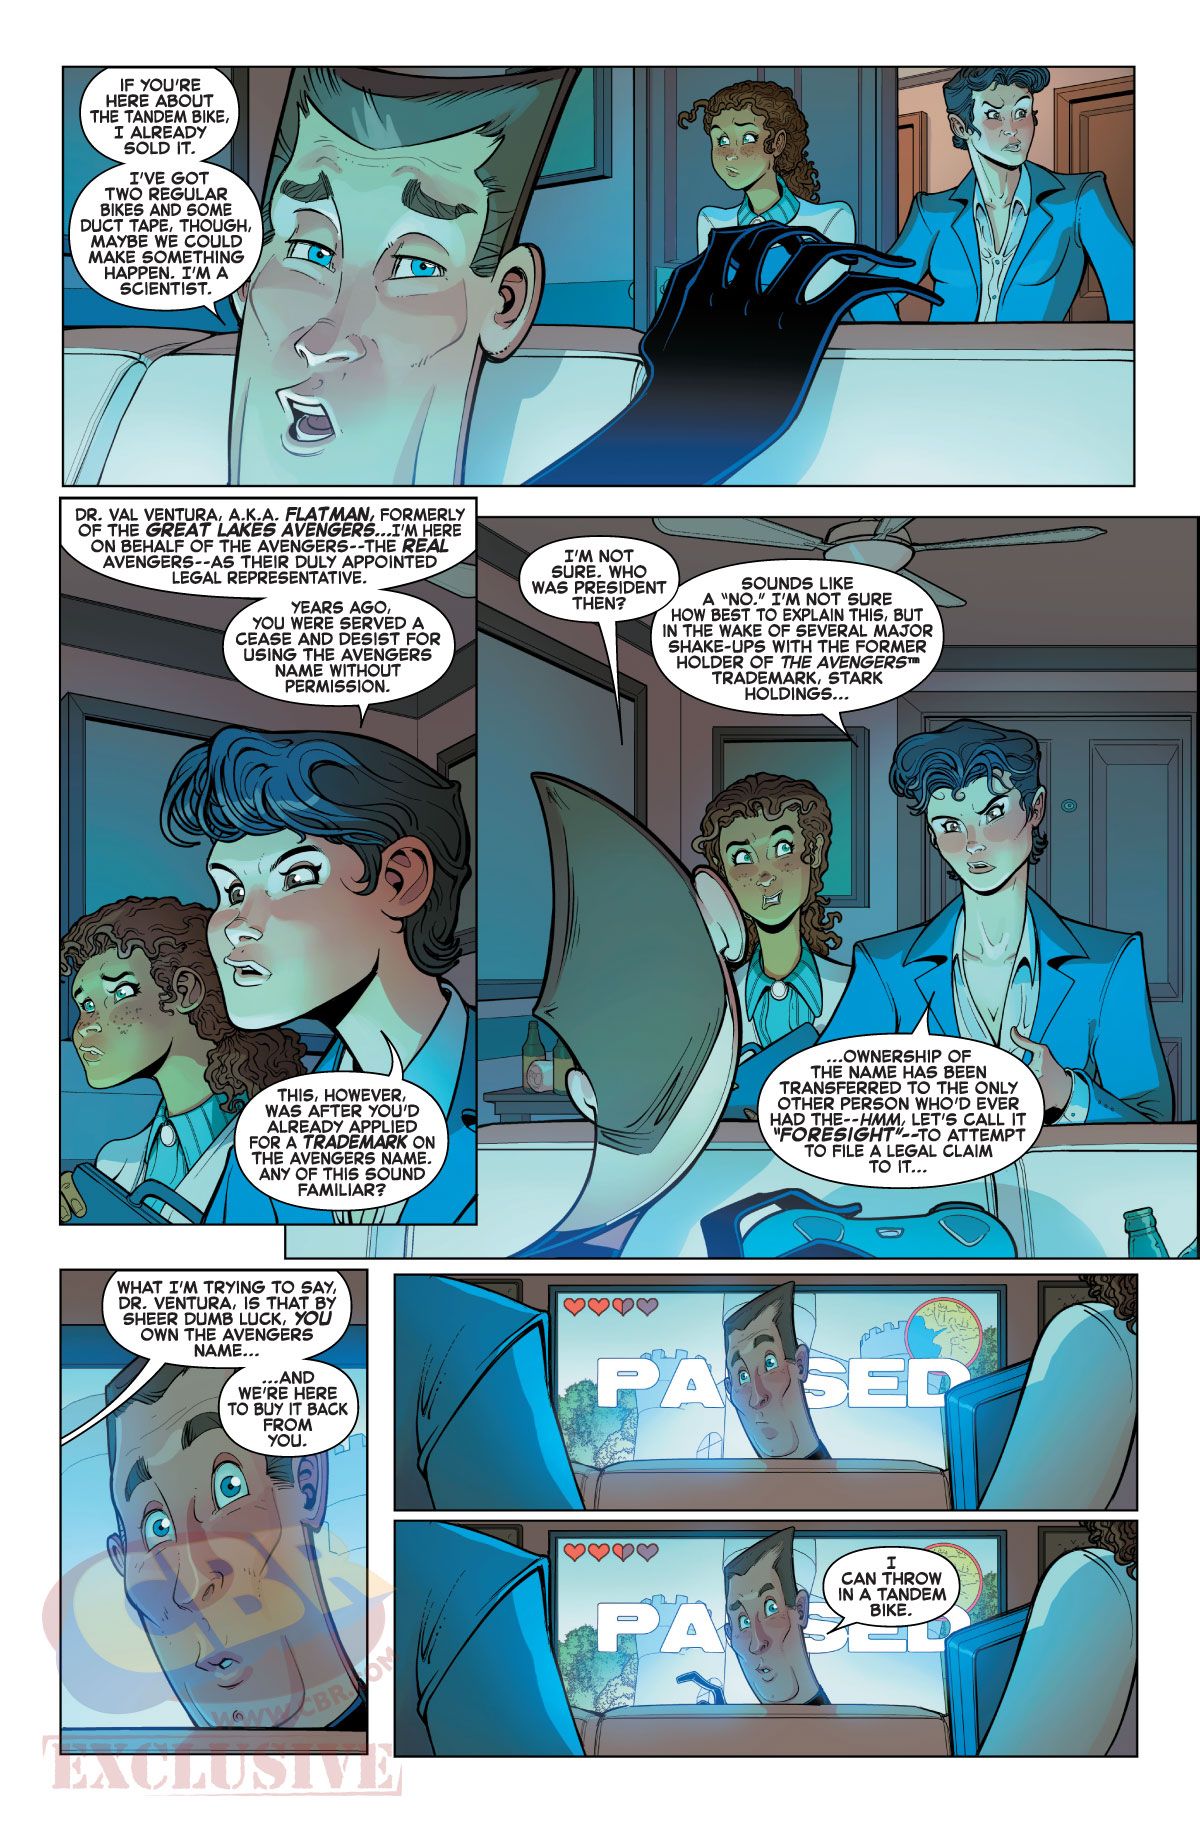 EXCLUSIVE: A page from Great Lakes Avengers #1